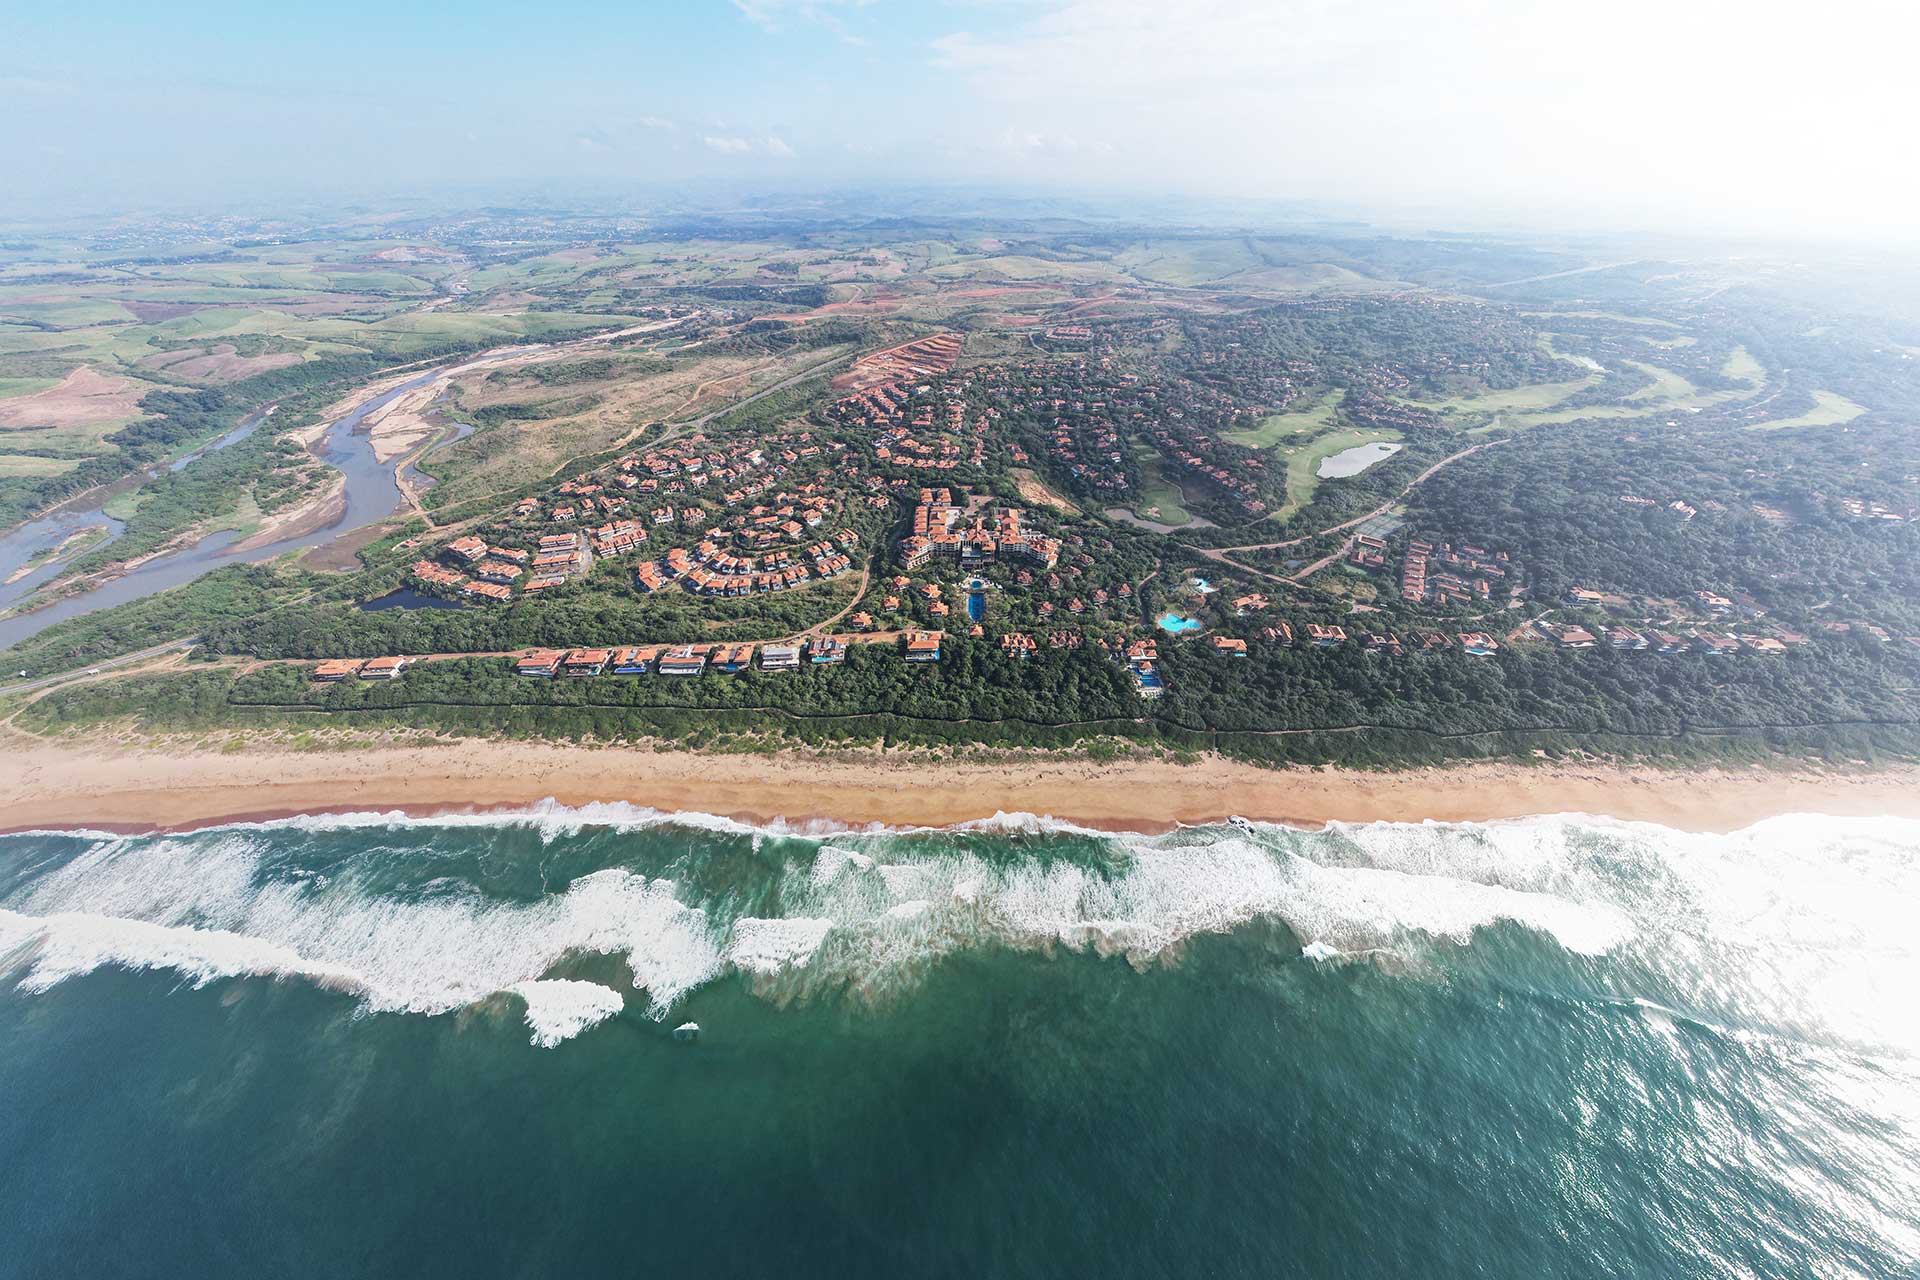 Drone shot of the Zimbali Estate